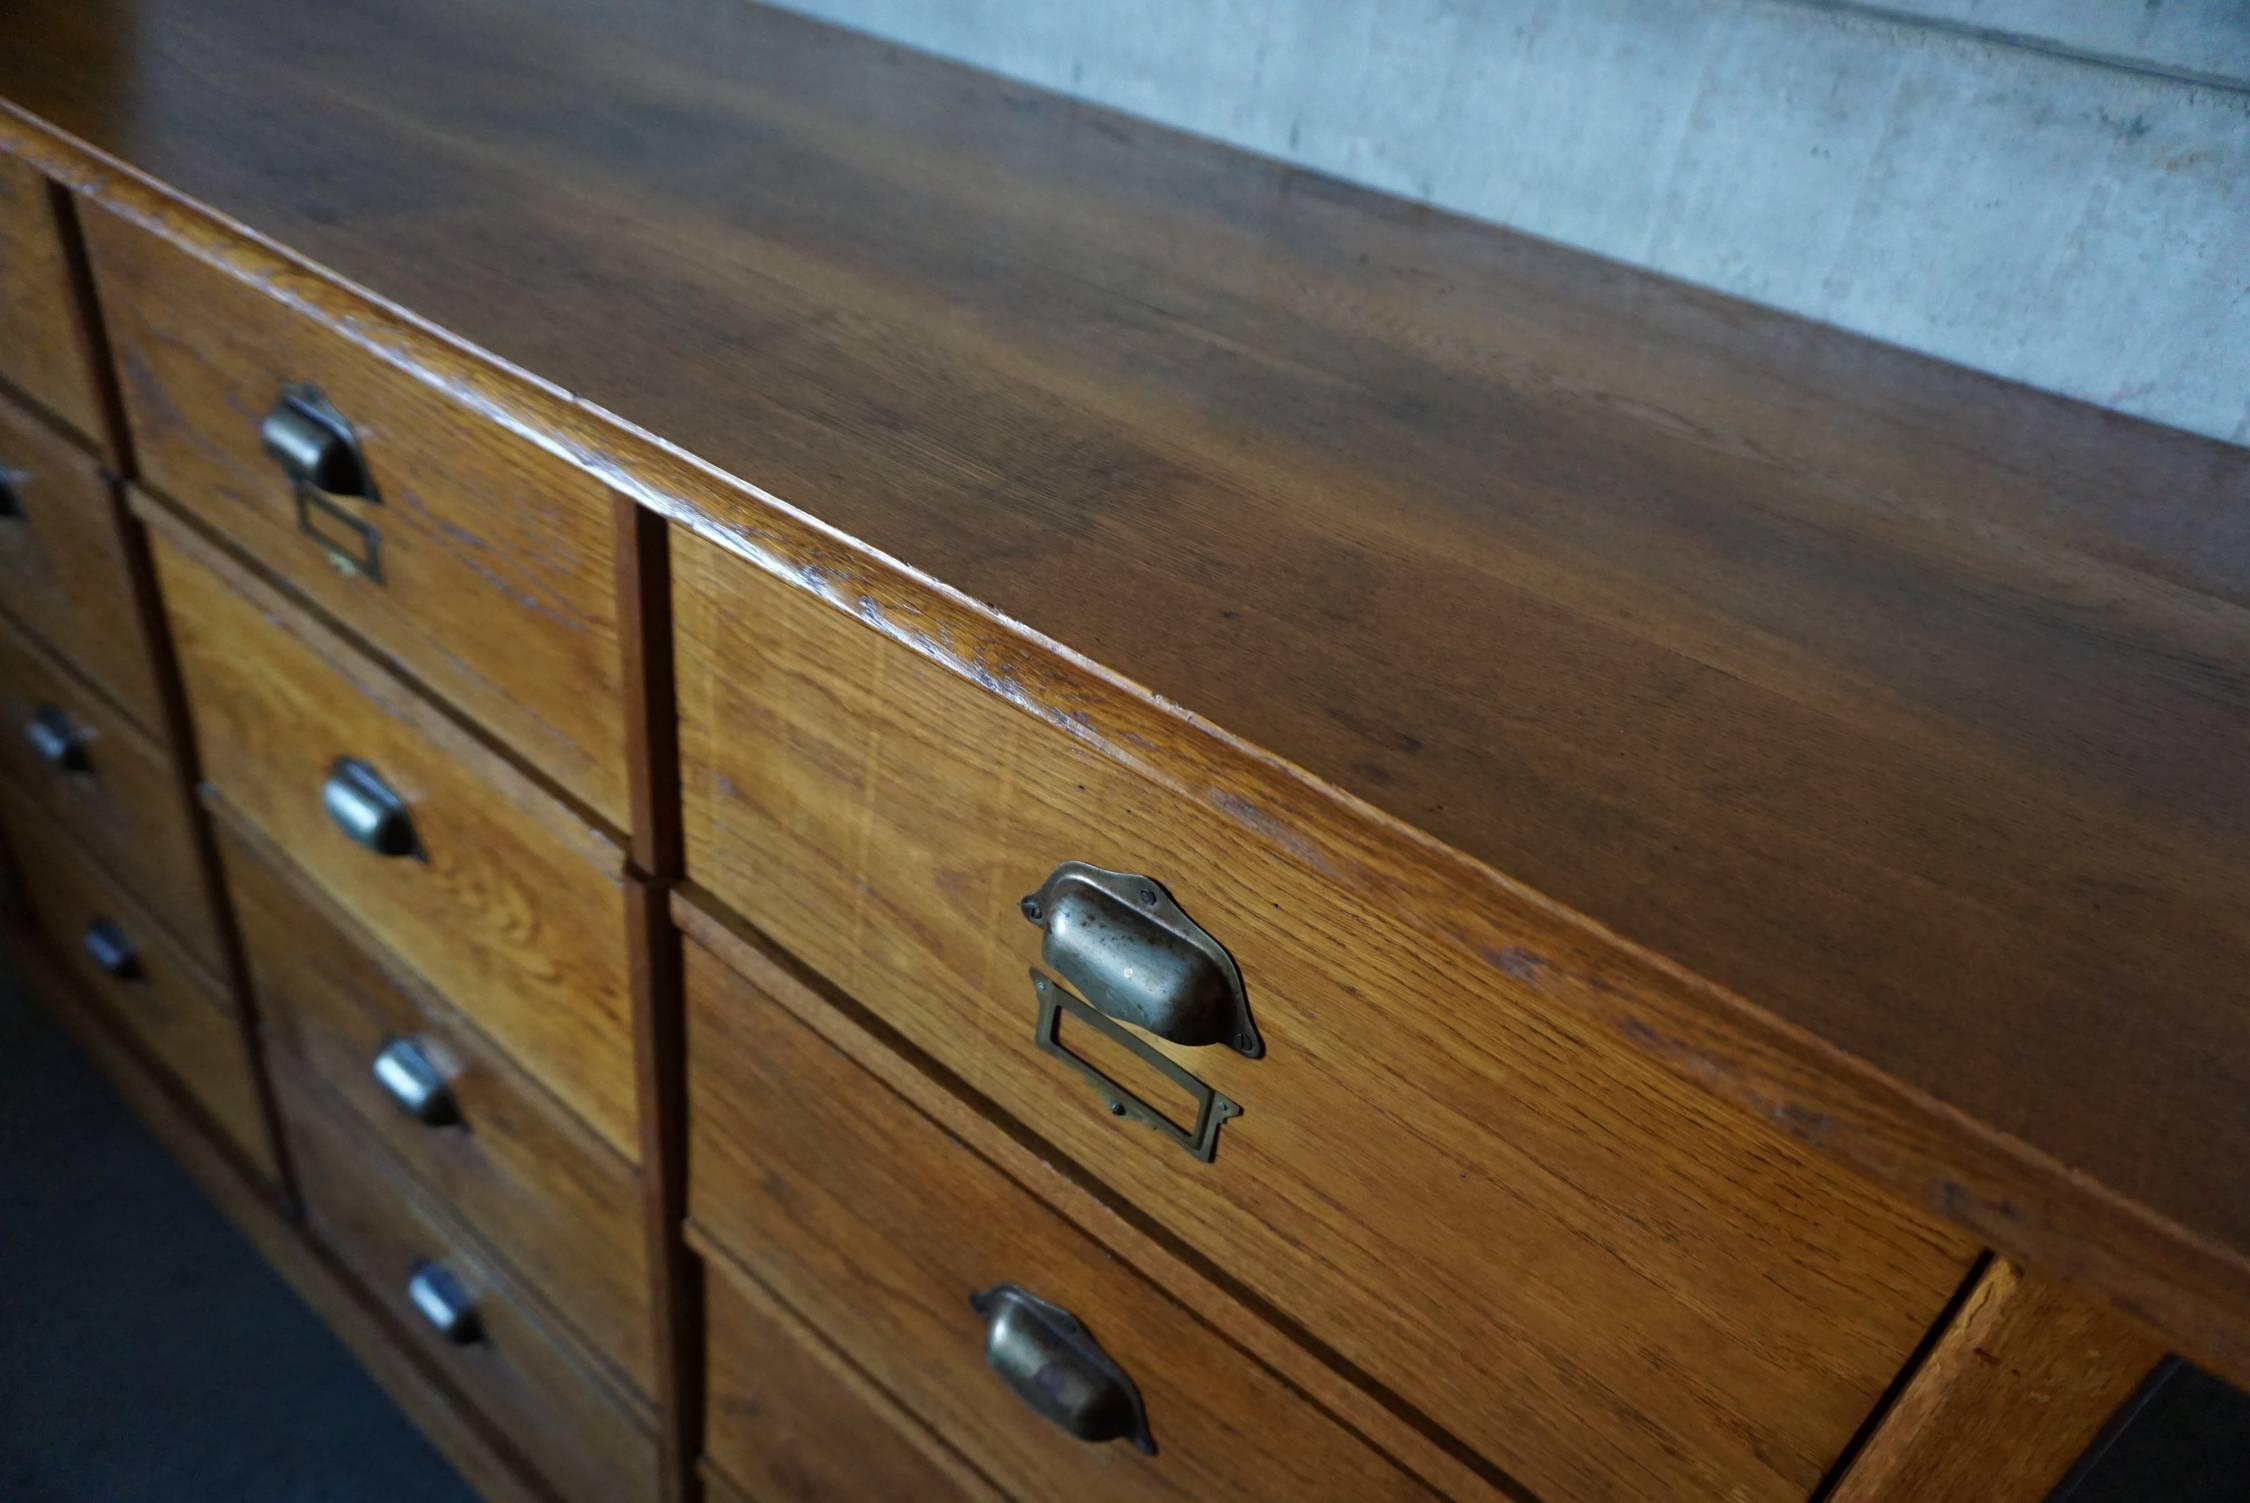 This apothecary bank of drawers was designed and made around the 1930s in France. The piece is made from oak with cup handles and brass hardware.